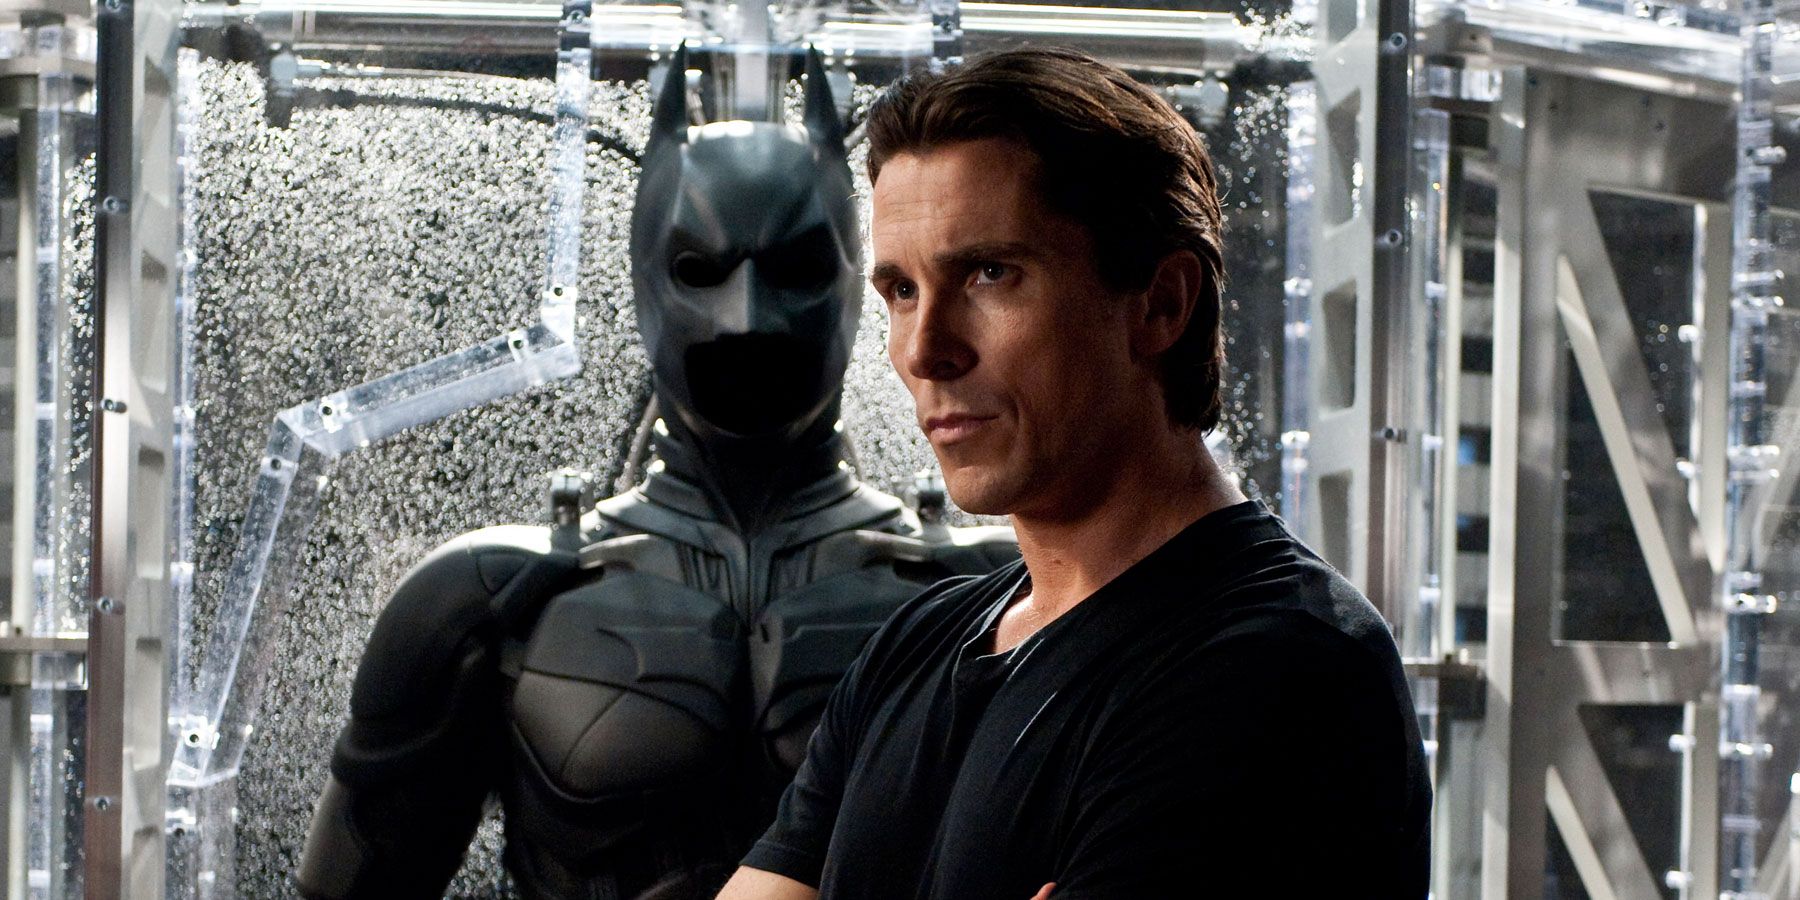 Christian Bale as Bruce Wayne in front of his suit